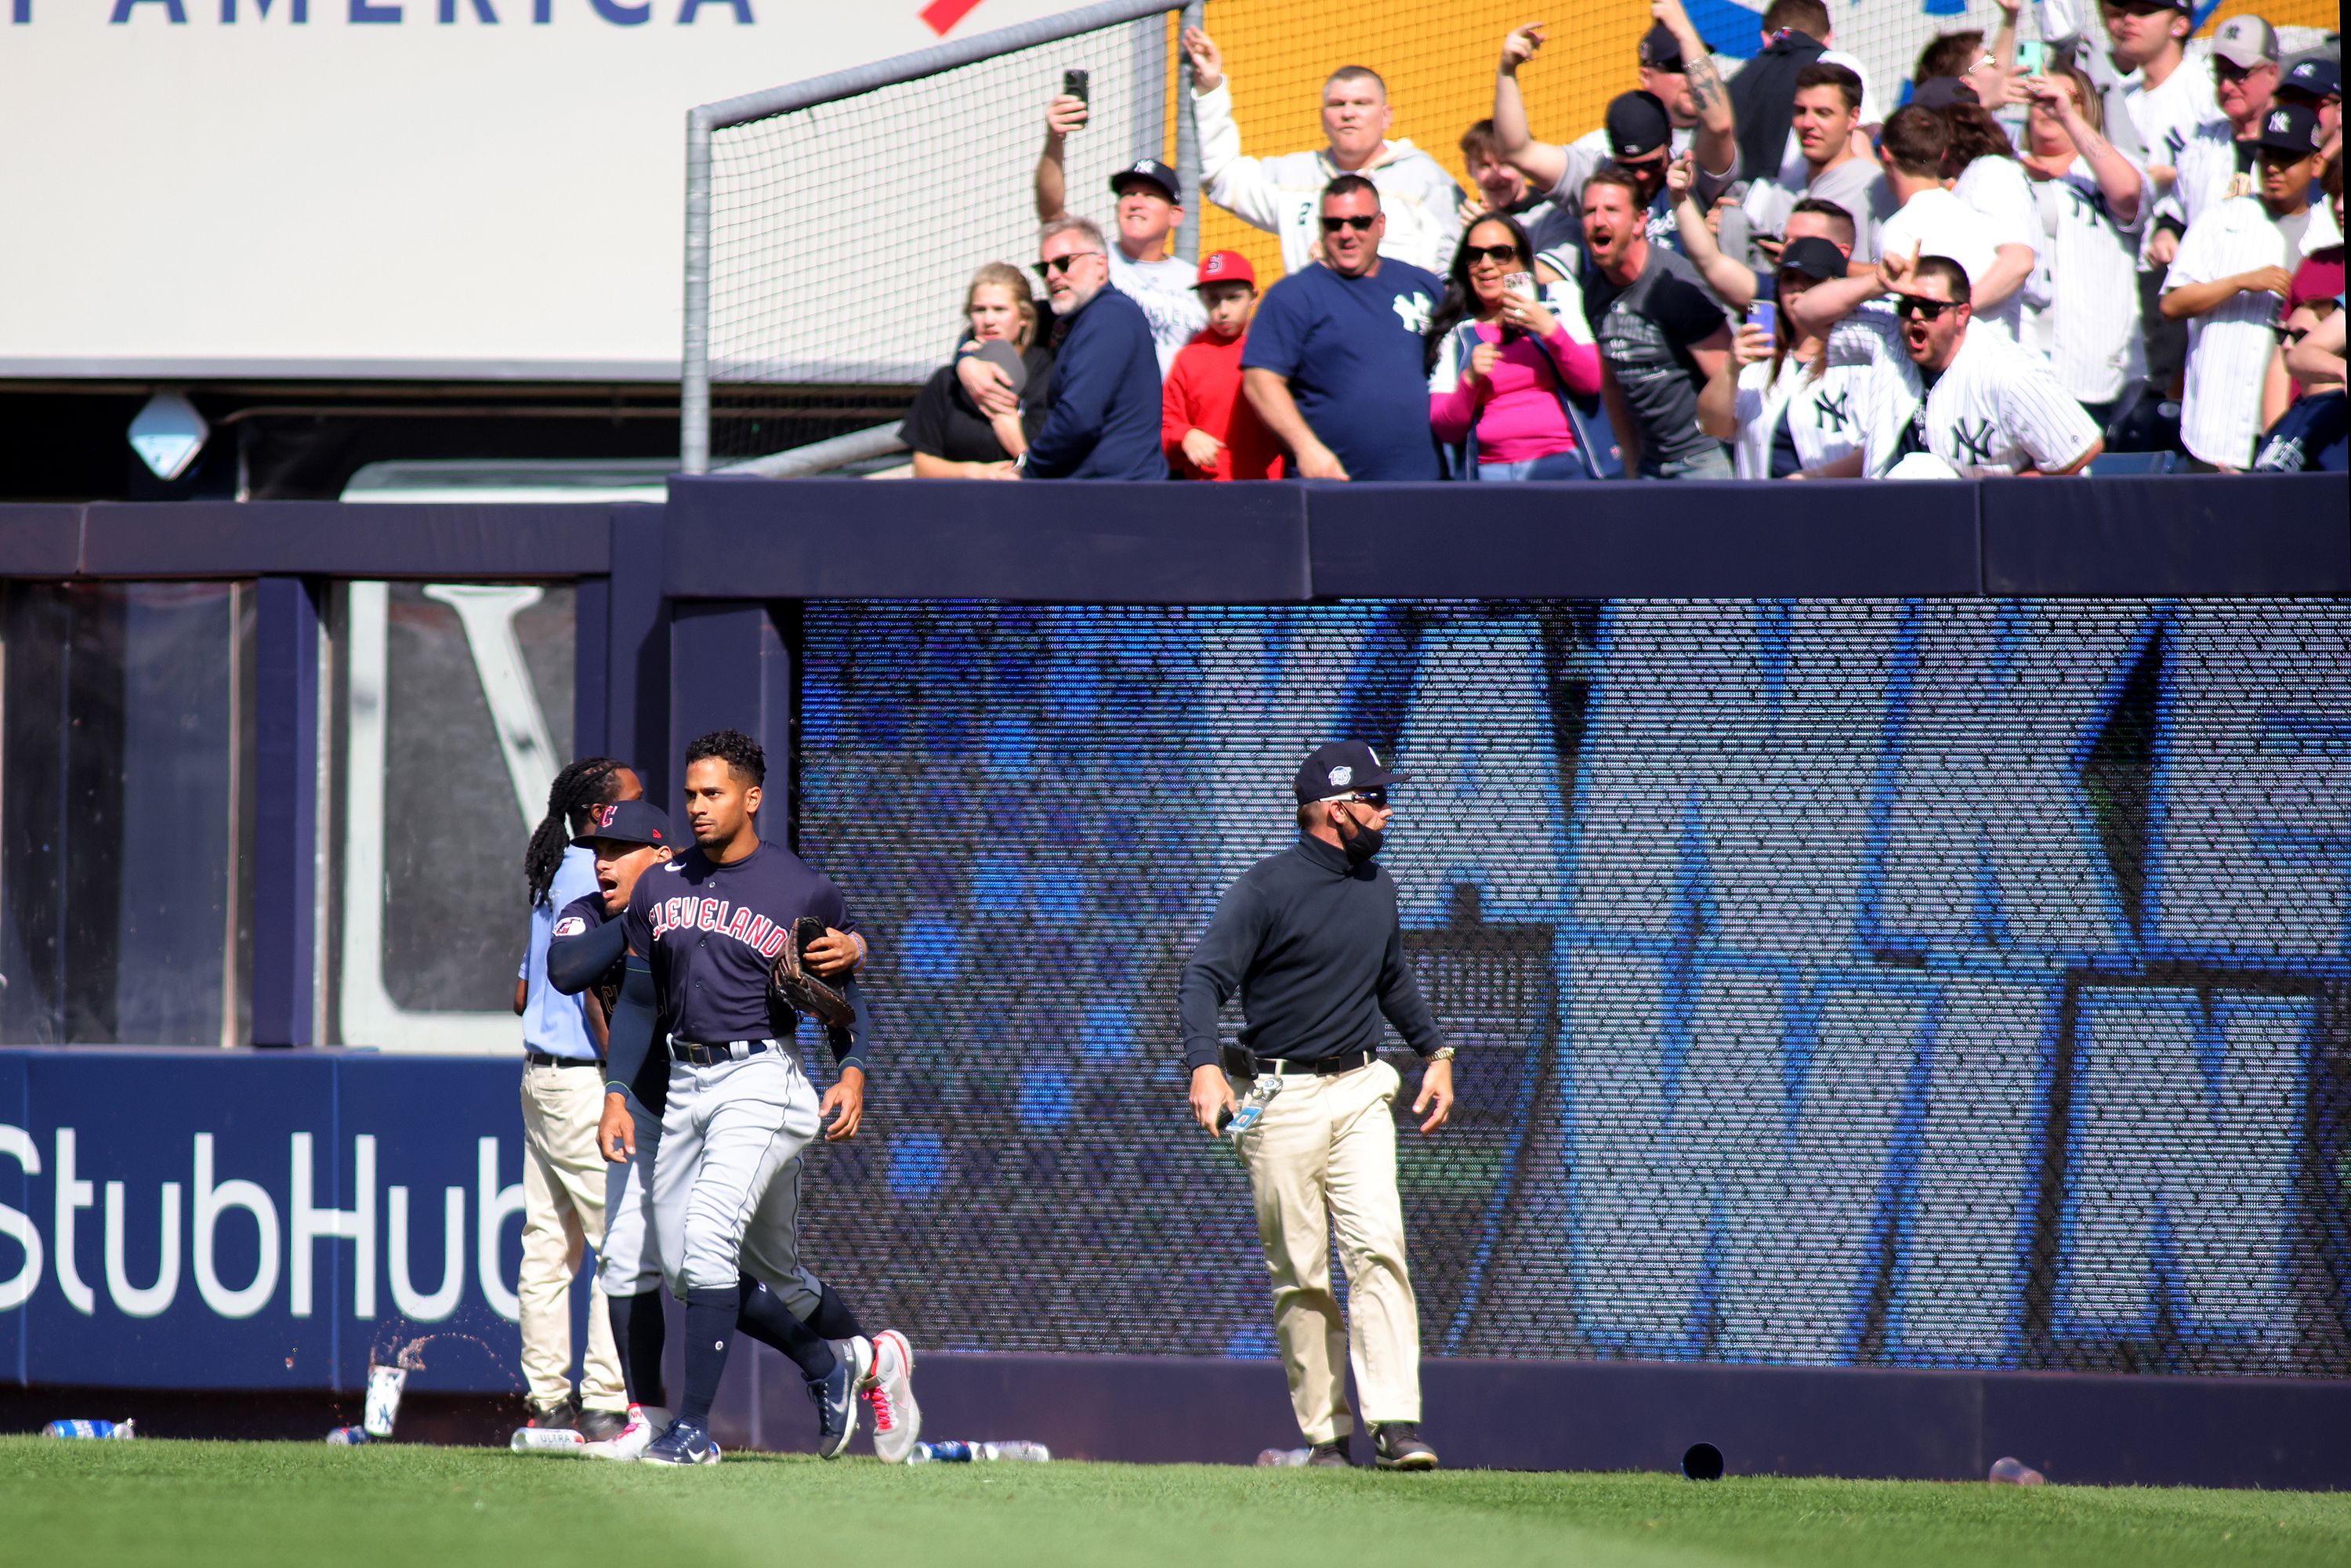 Yankees fans throw trash at Guardians outfielders after New York win